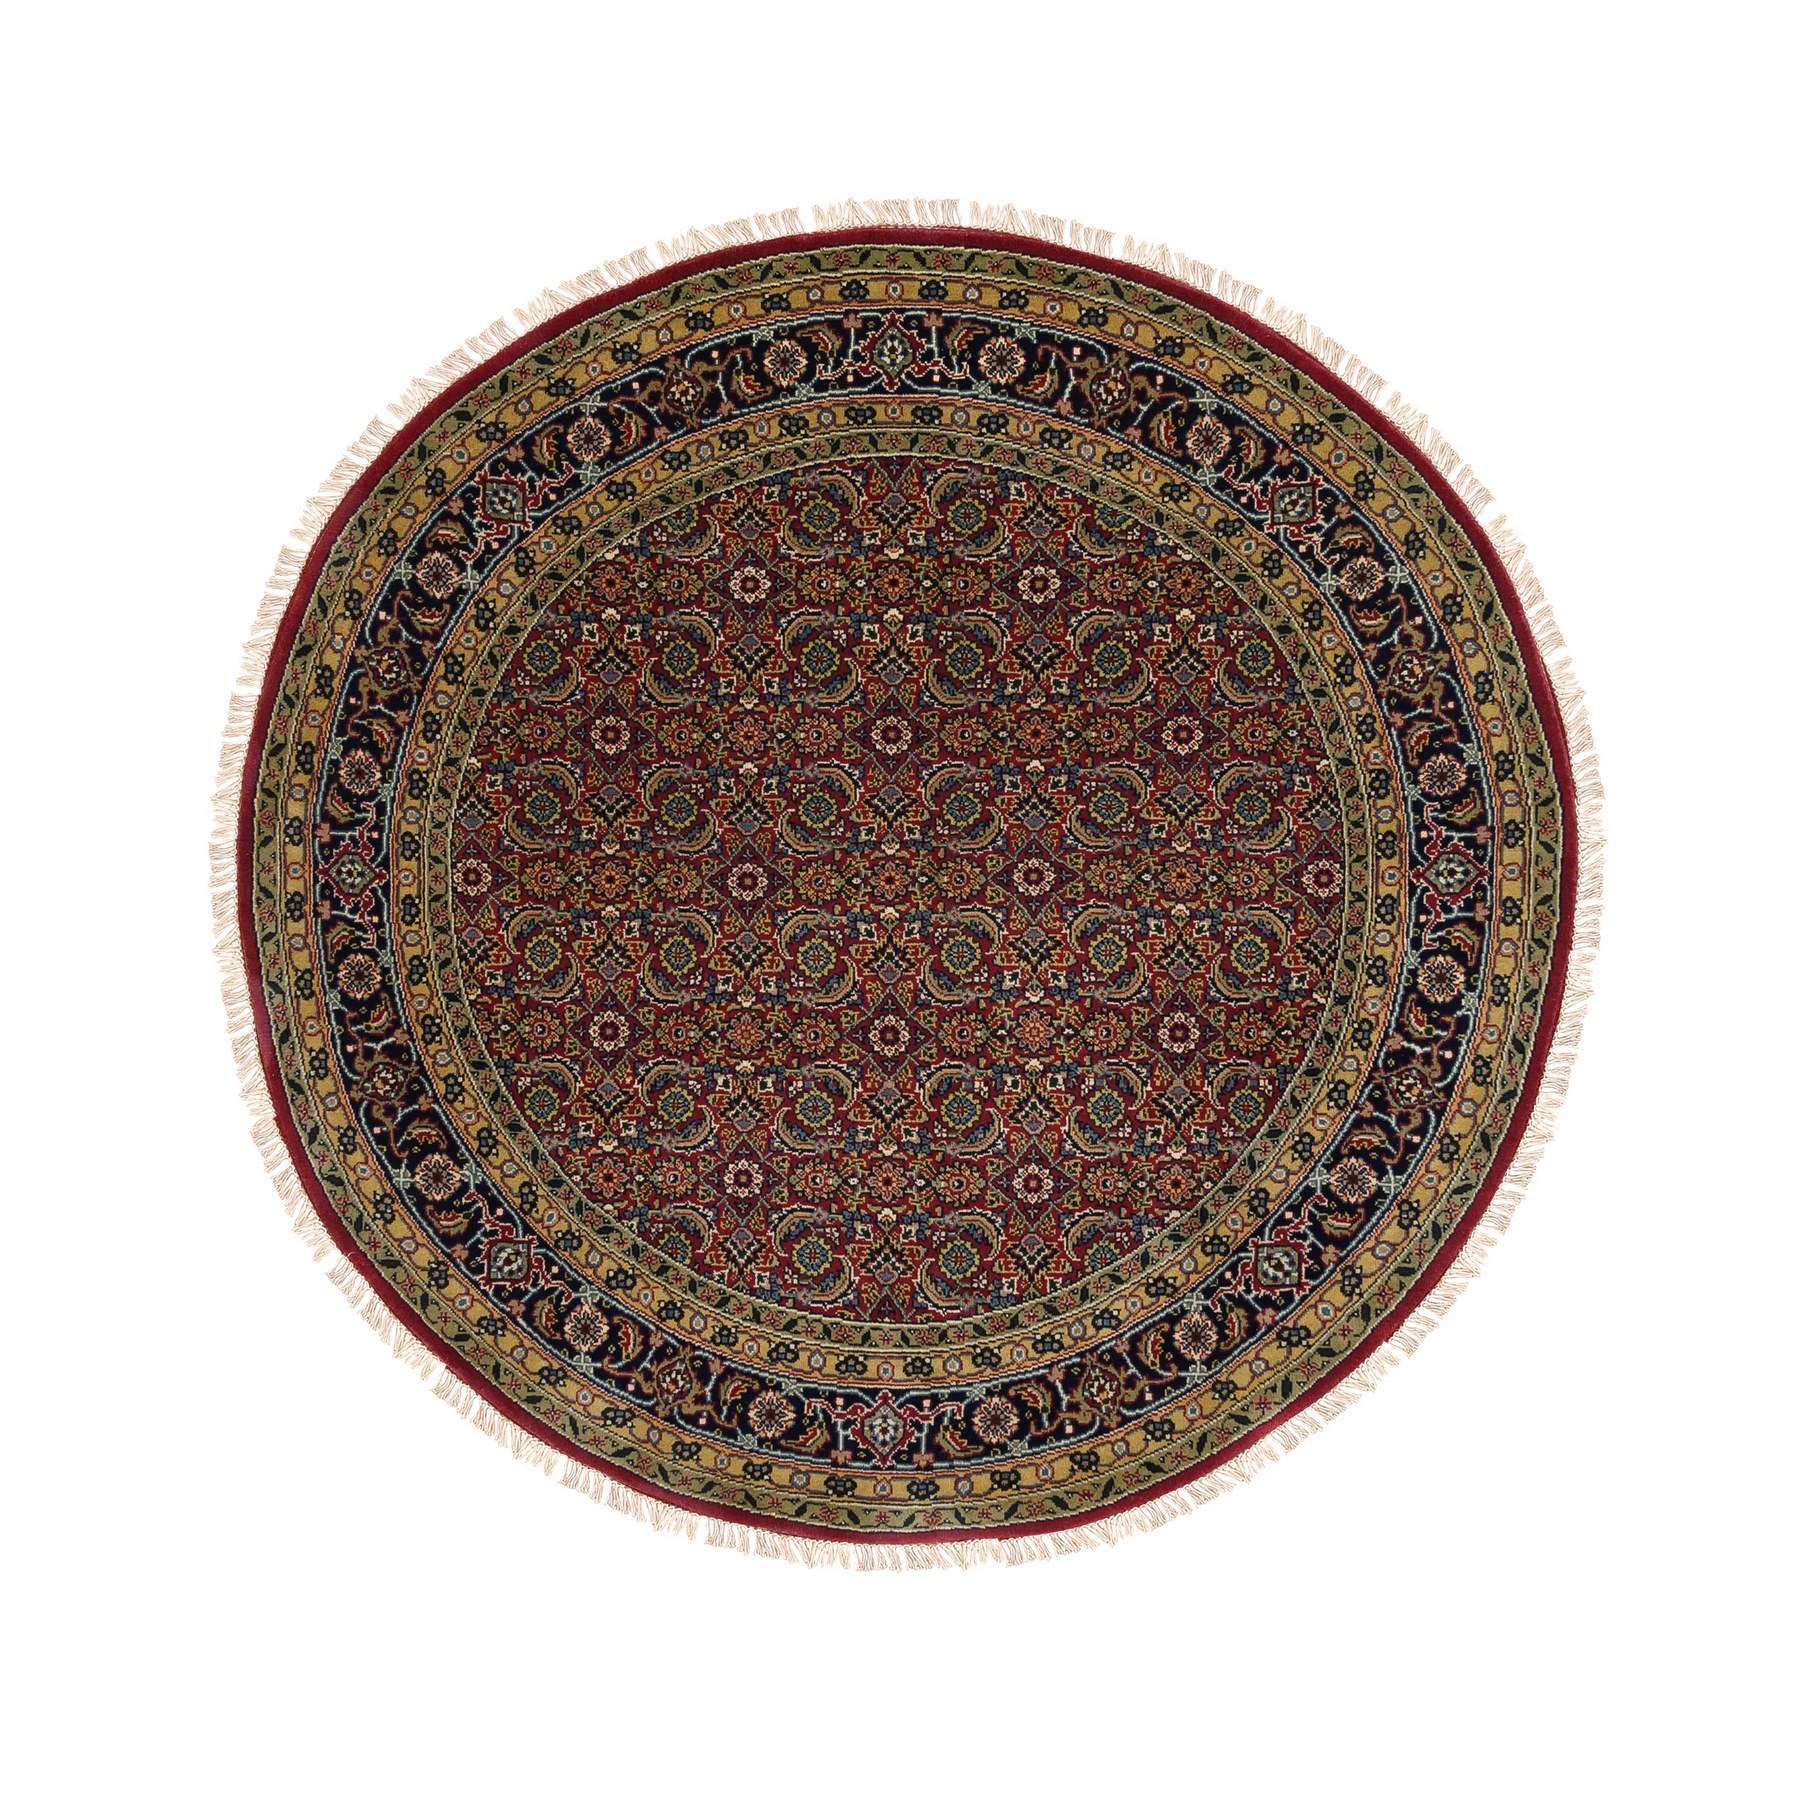 Pirniakan Collection Hand Knotted Red Rug No: 1124700